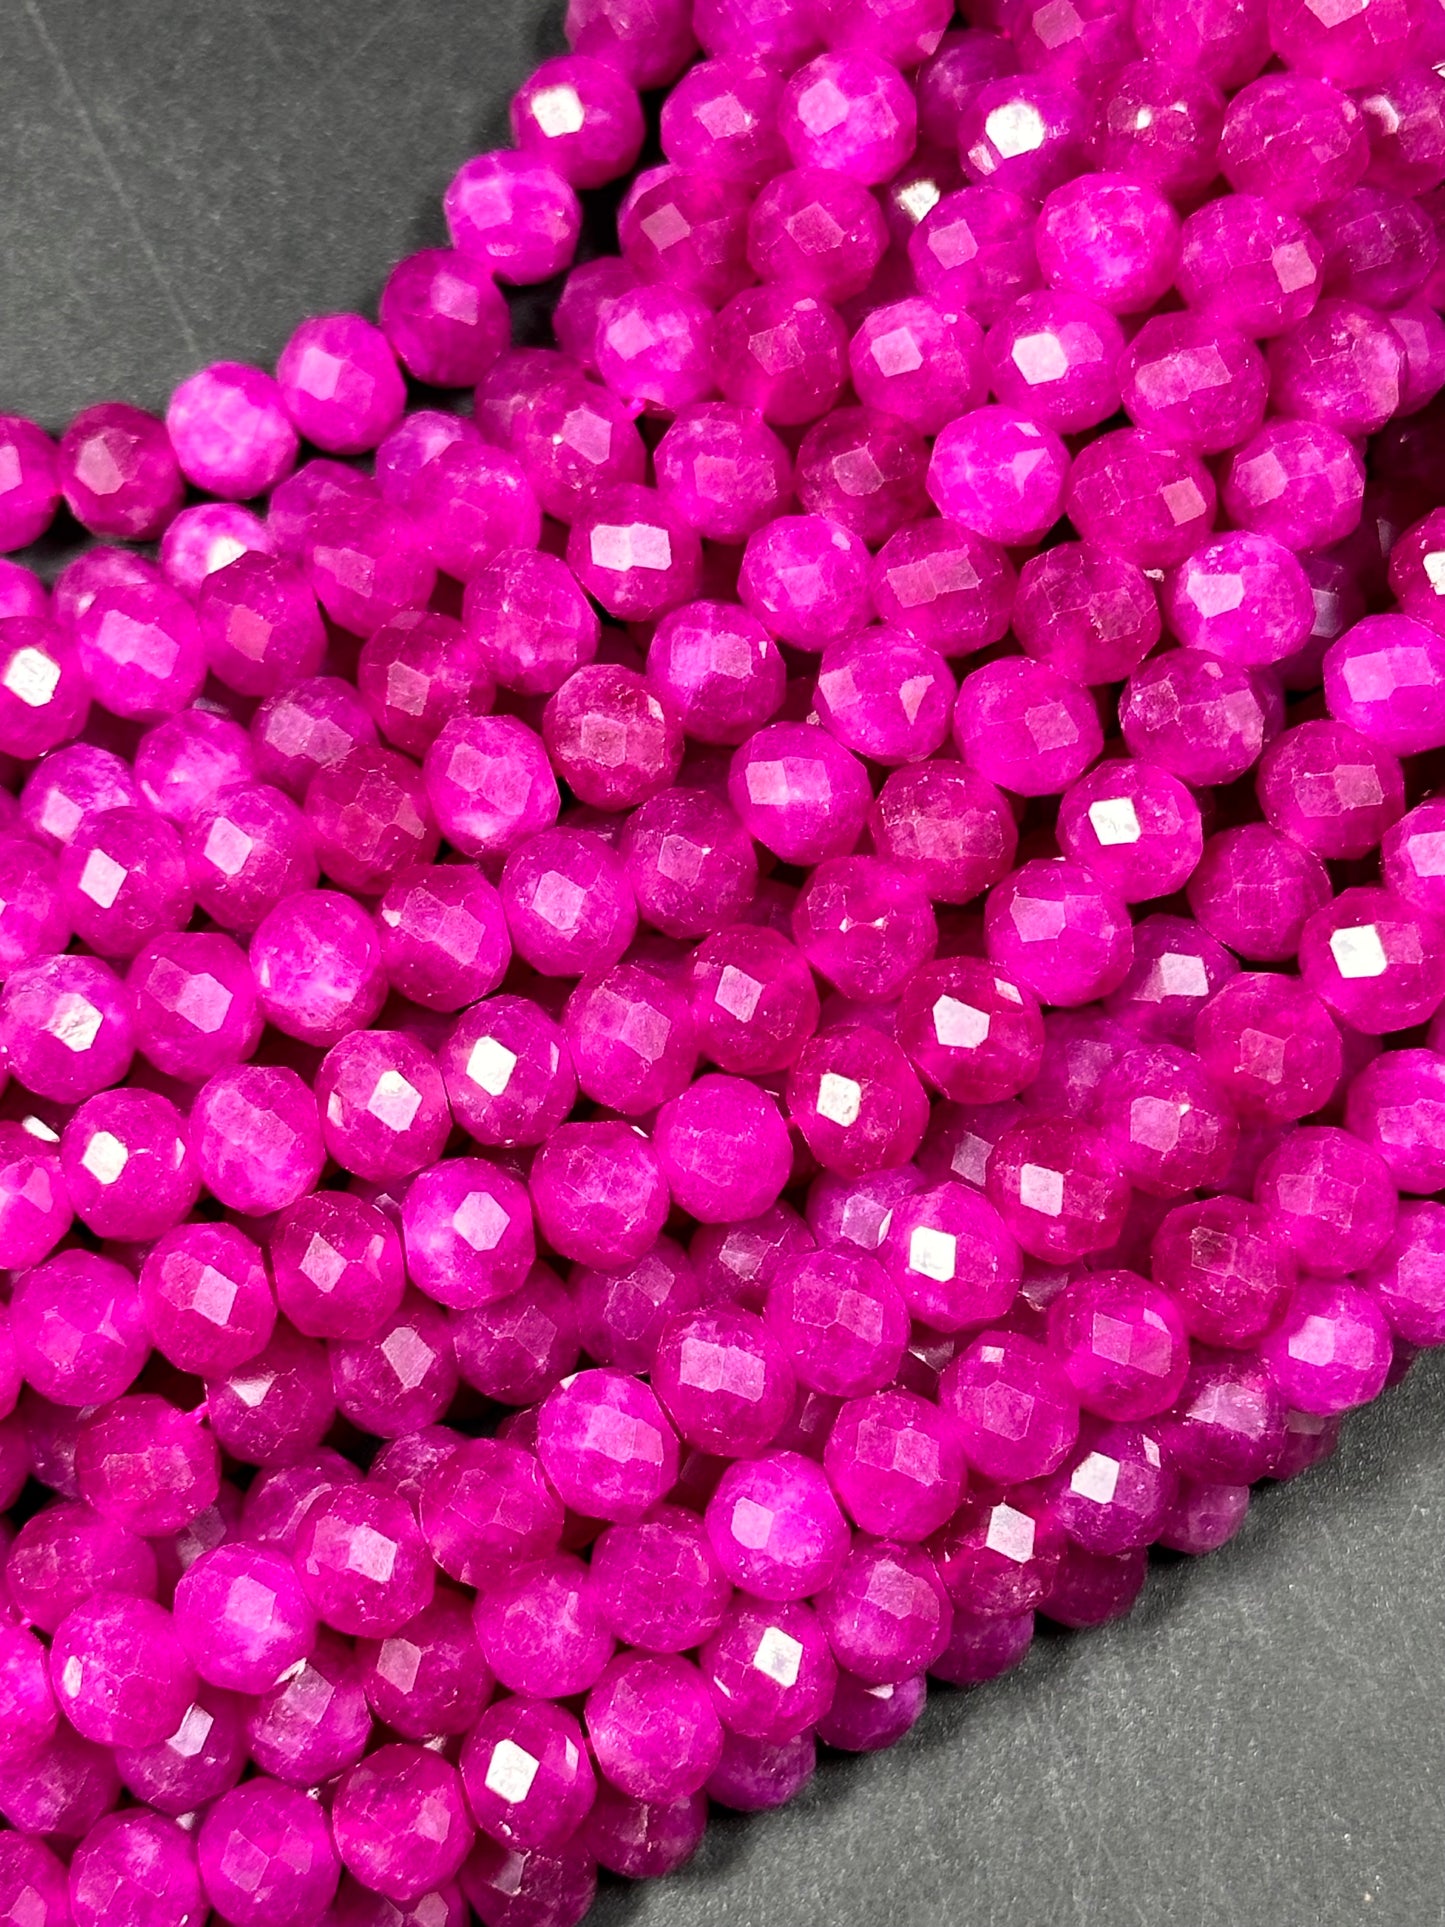 AA+ NATURAL Ruby Quartz Gemstone Bead Faceted 6x5mm 8x6mm Rondelle Shape, Gorgeous Red Pink Color Ruby Quartz Gemstone Bead, Great Quality Quartz